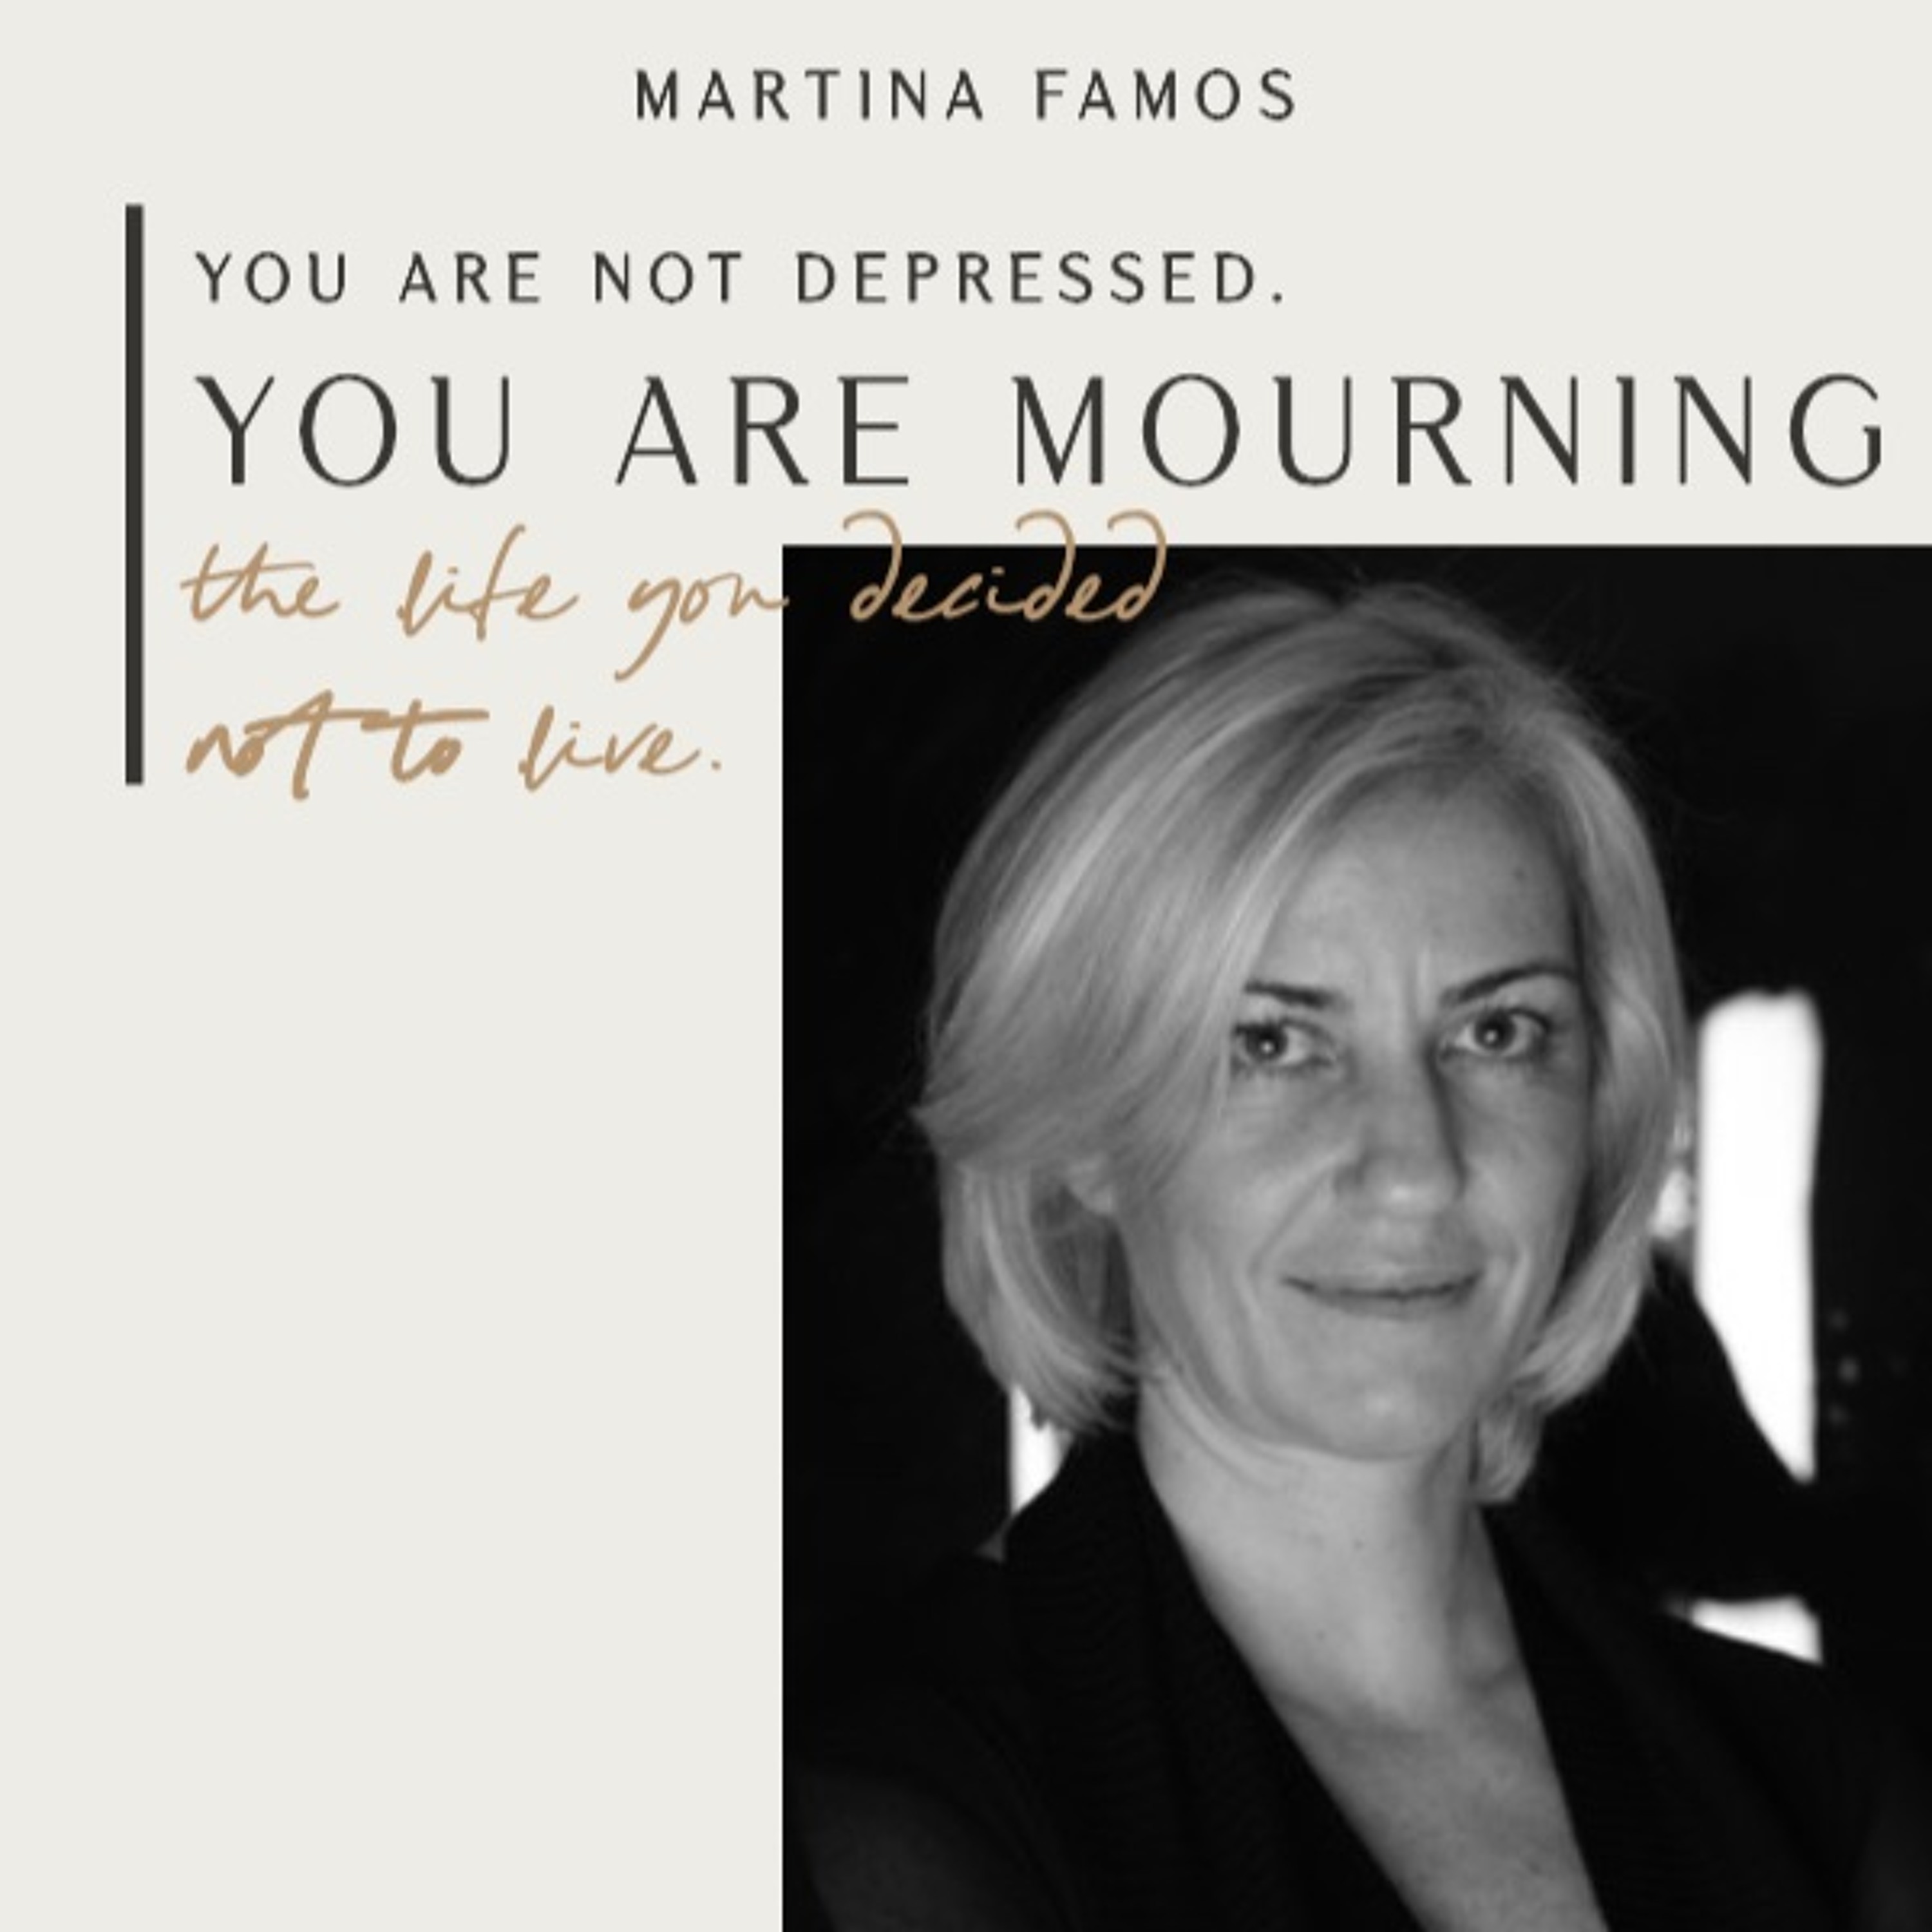 #belonging series: Mourning the life you decided not to live.